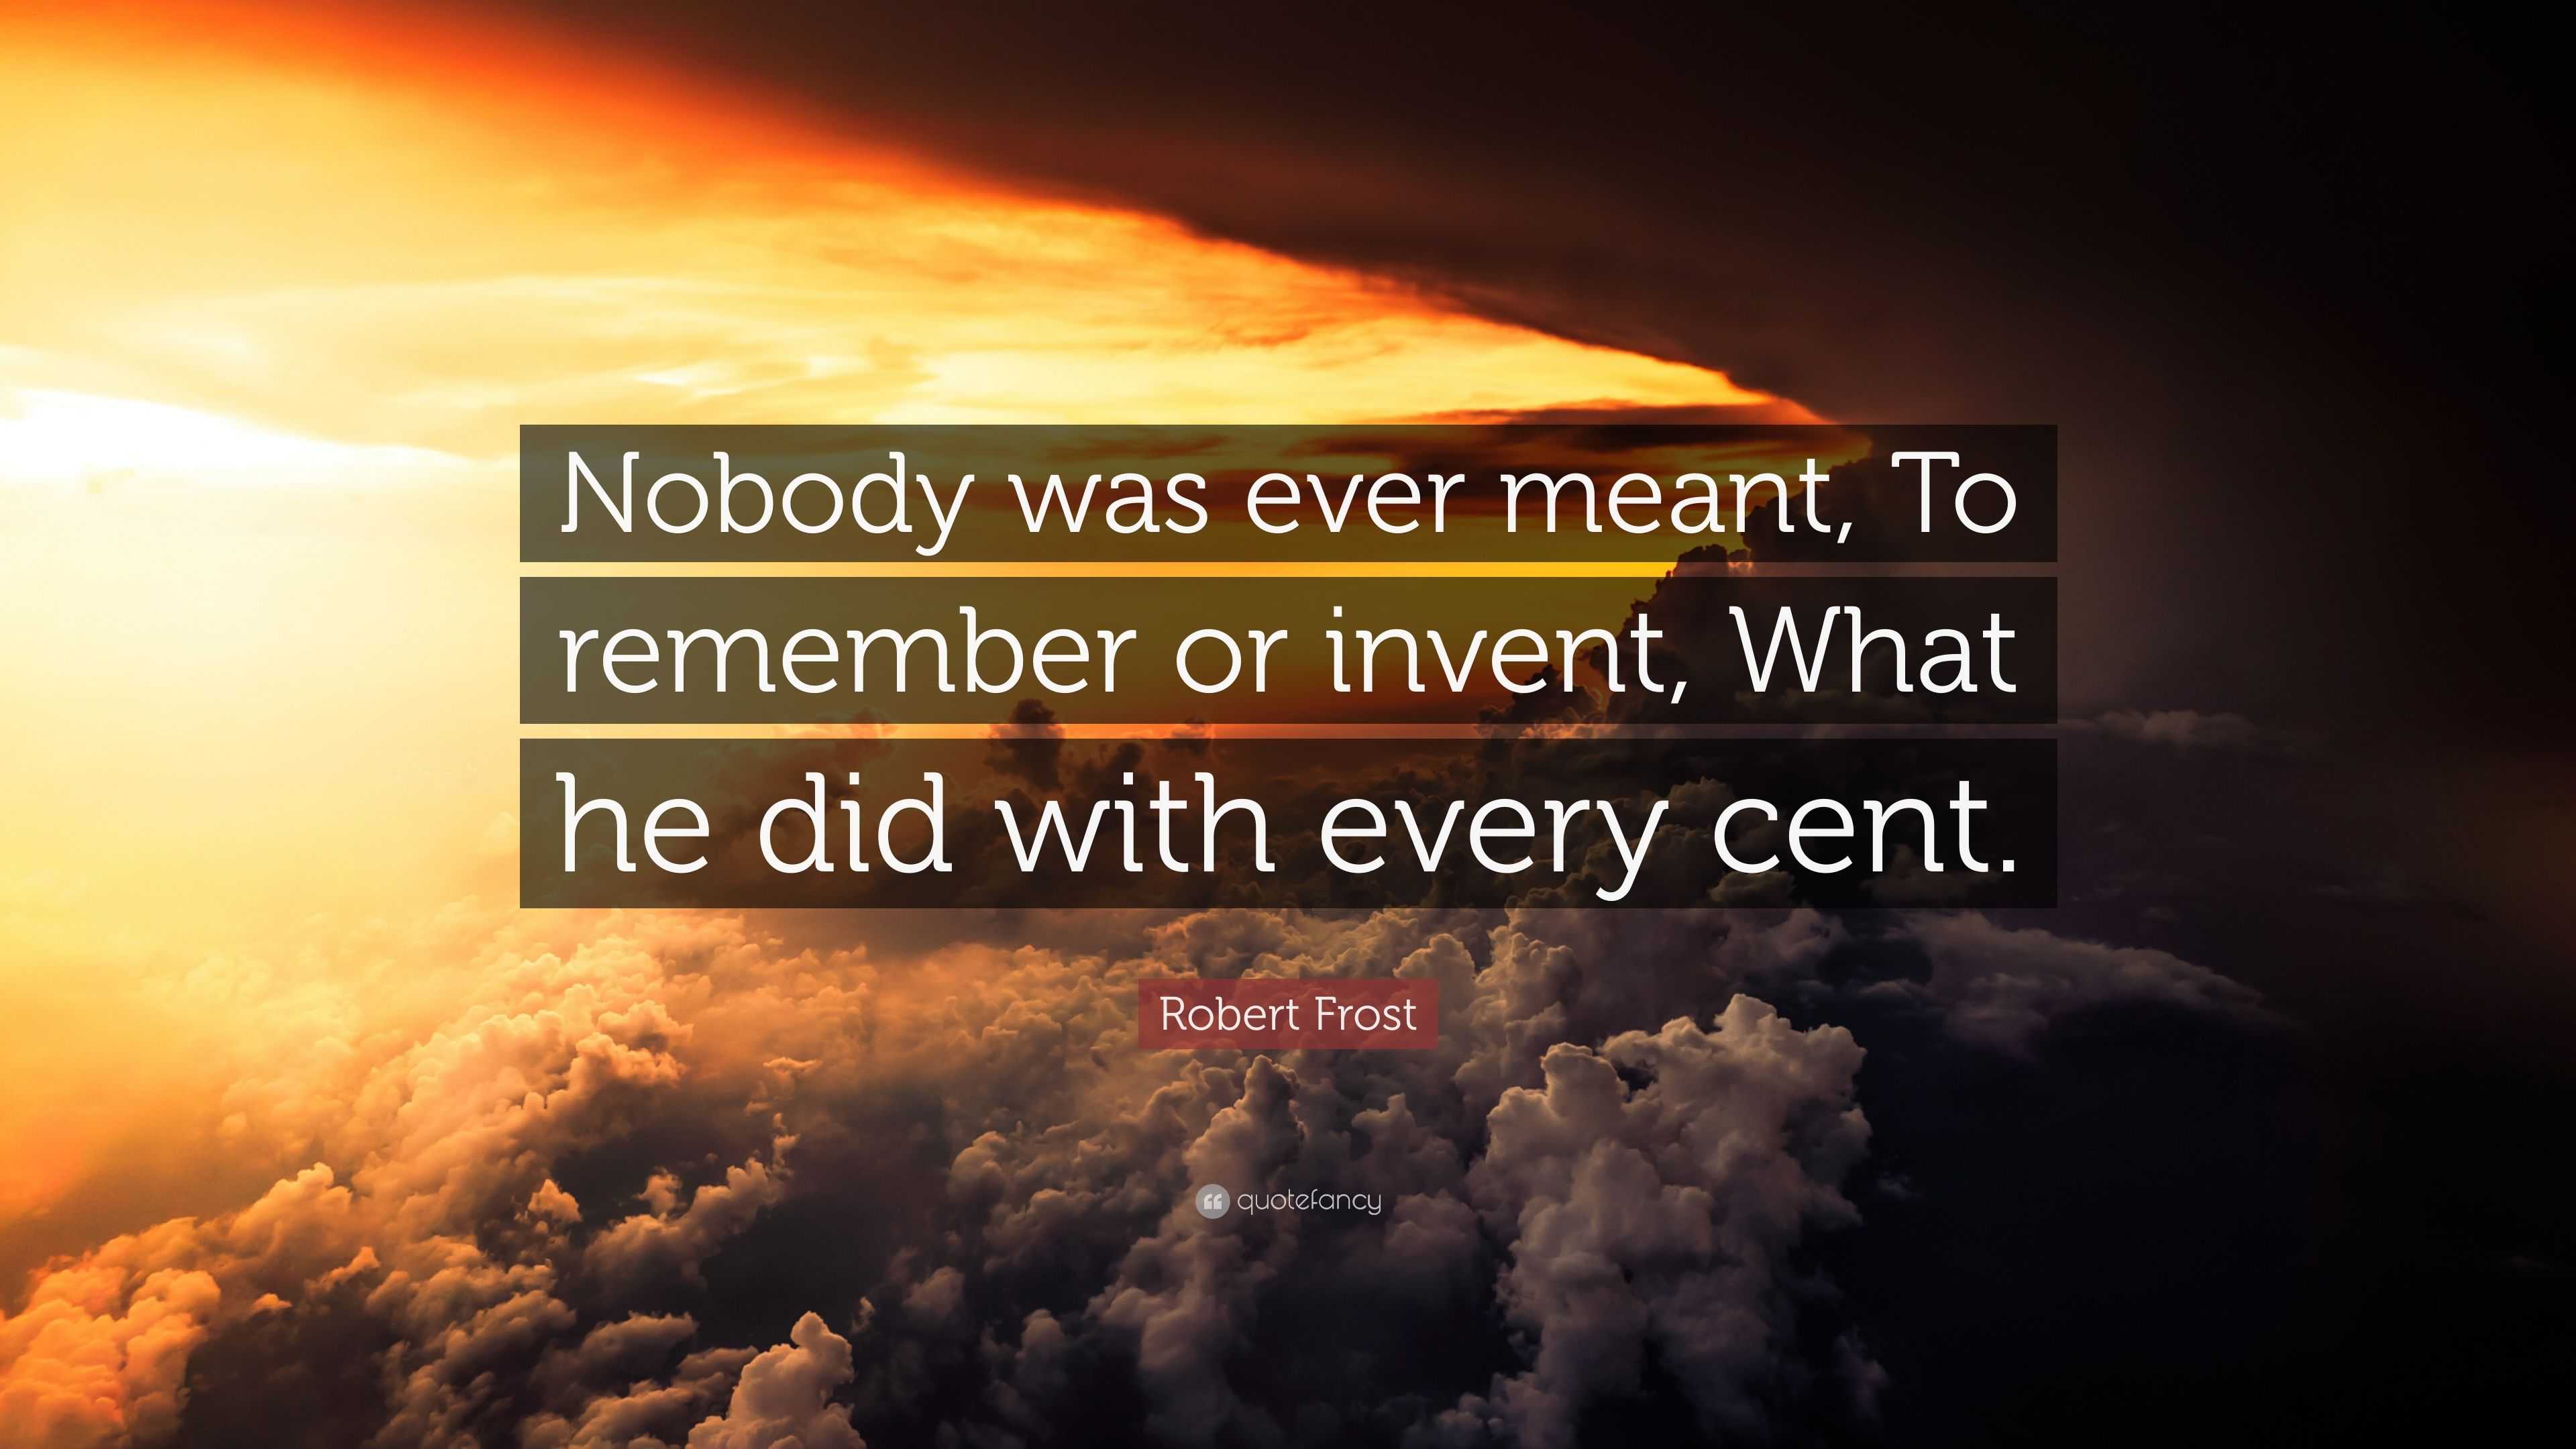 Robert Frost Quote: “Nobody was ever meant, To remember or invent, What ...